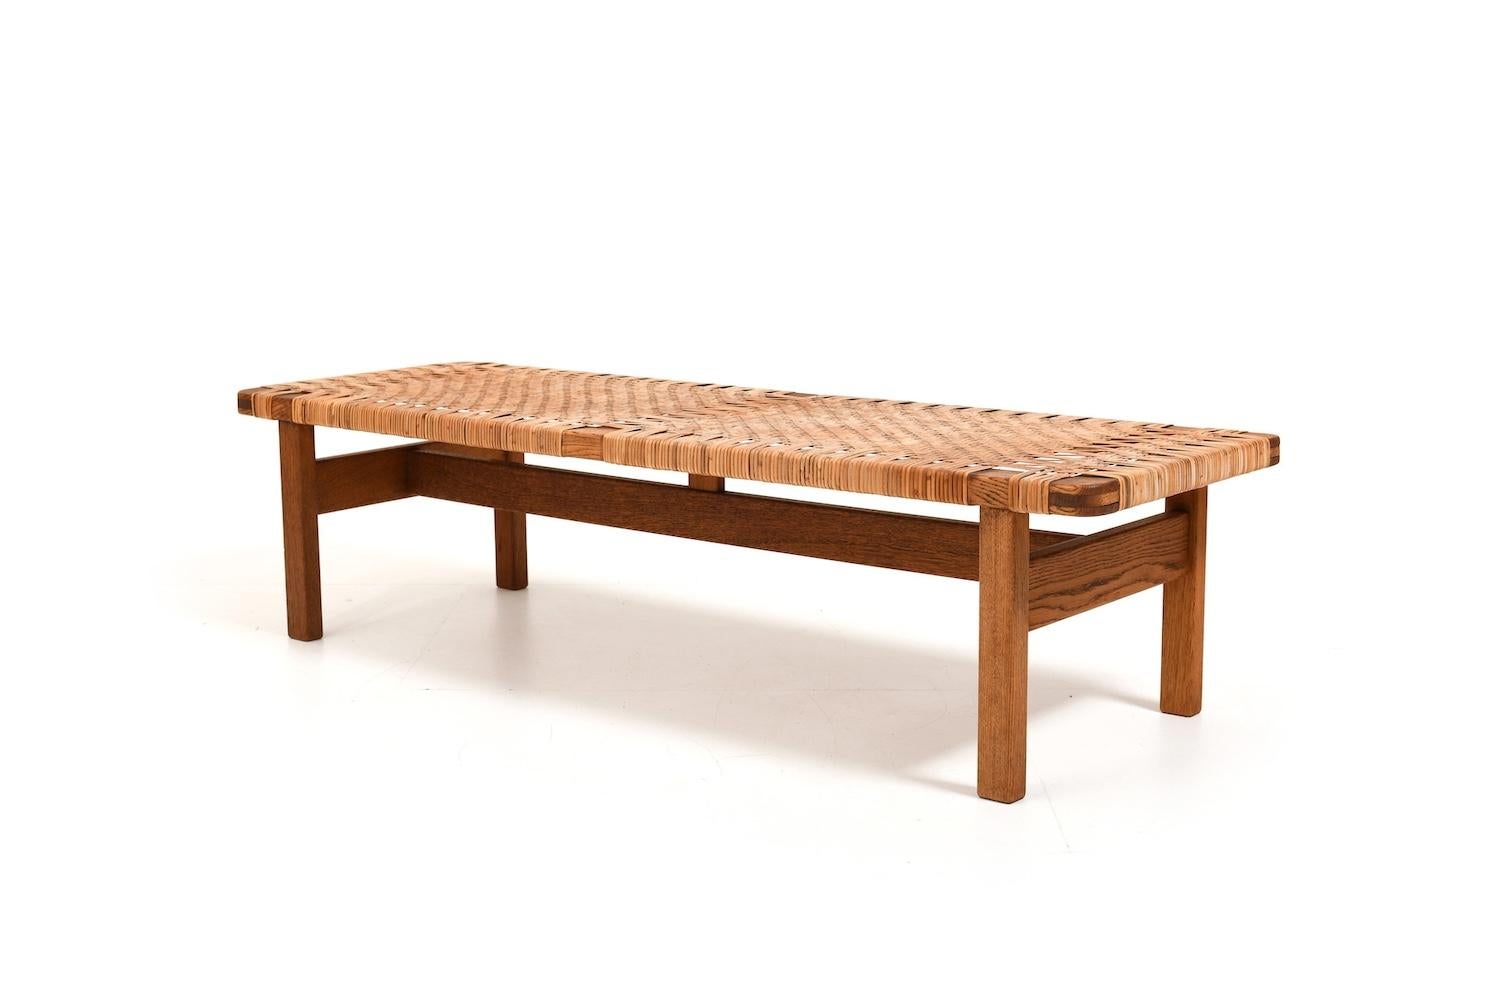 Beautiful old bench, model 5272 (272 stamped) by Børge Mogensen for Fredericia Stolefabrik Denmark 1950s. Made in solid oak and cane. Produced in 1950s. Untouched condition with patina. Withe old brandmark underneath.